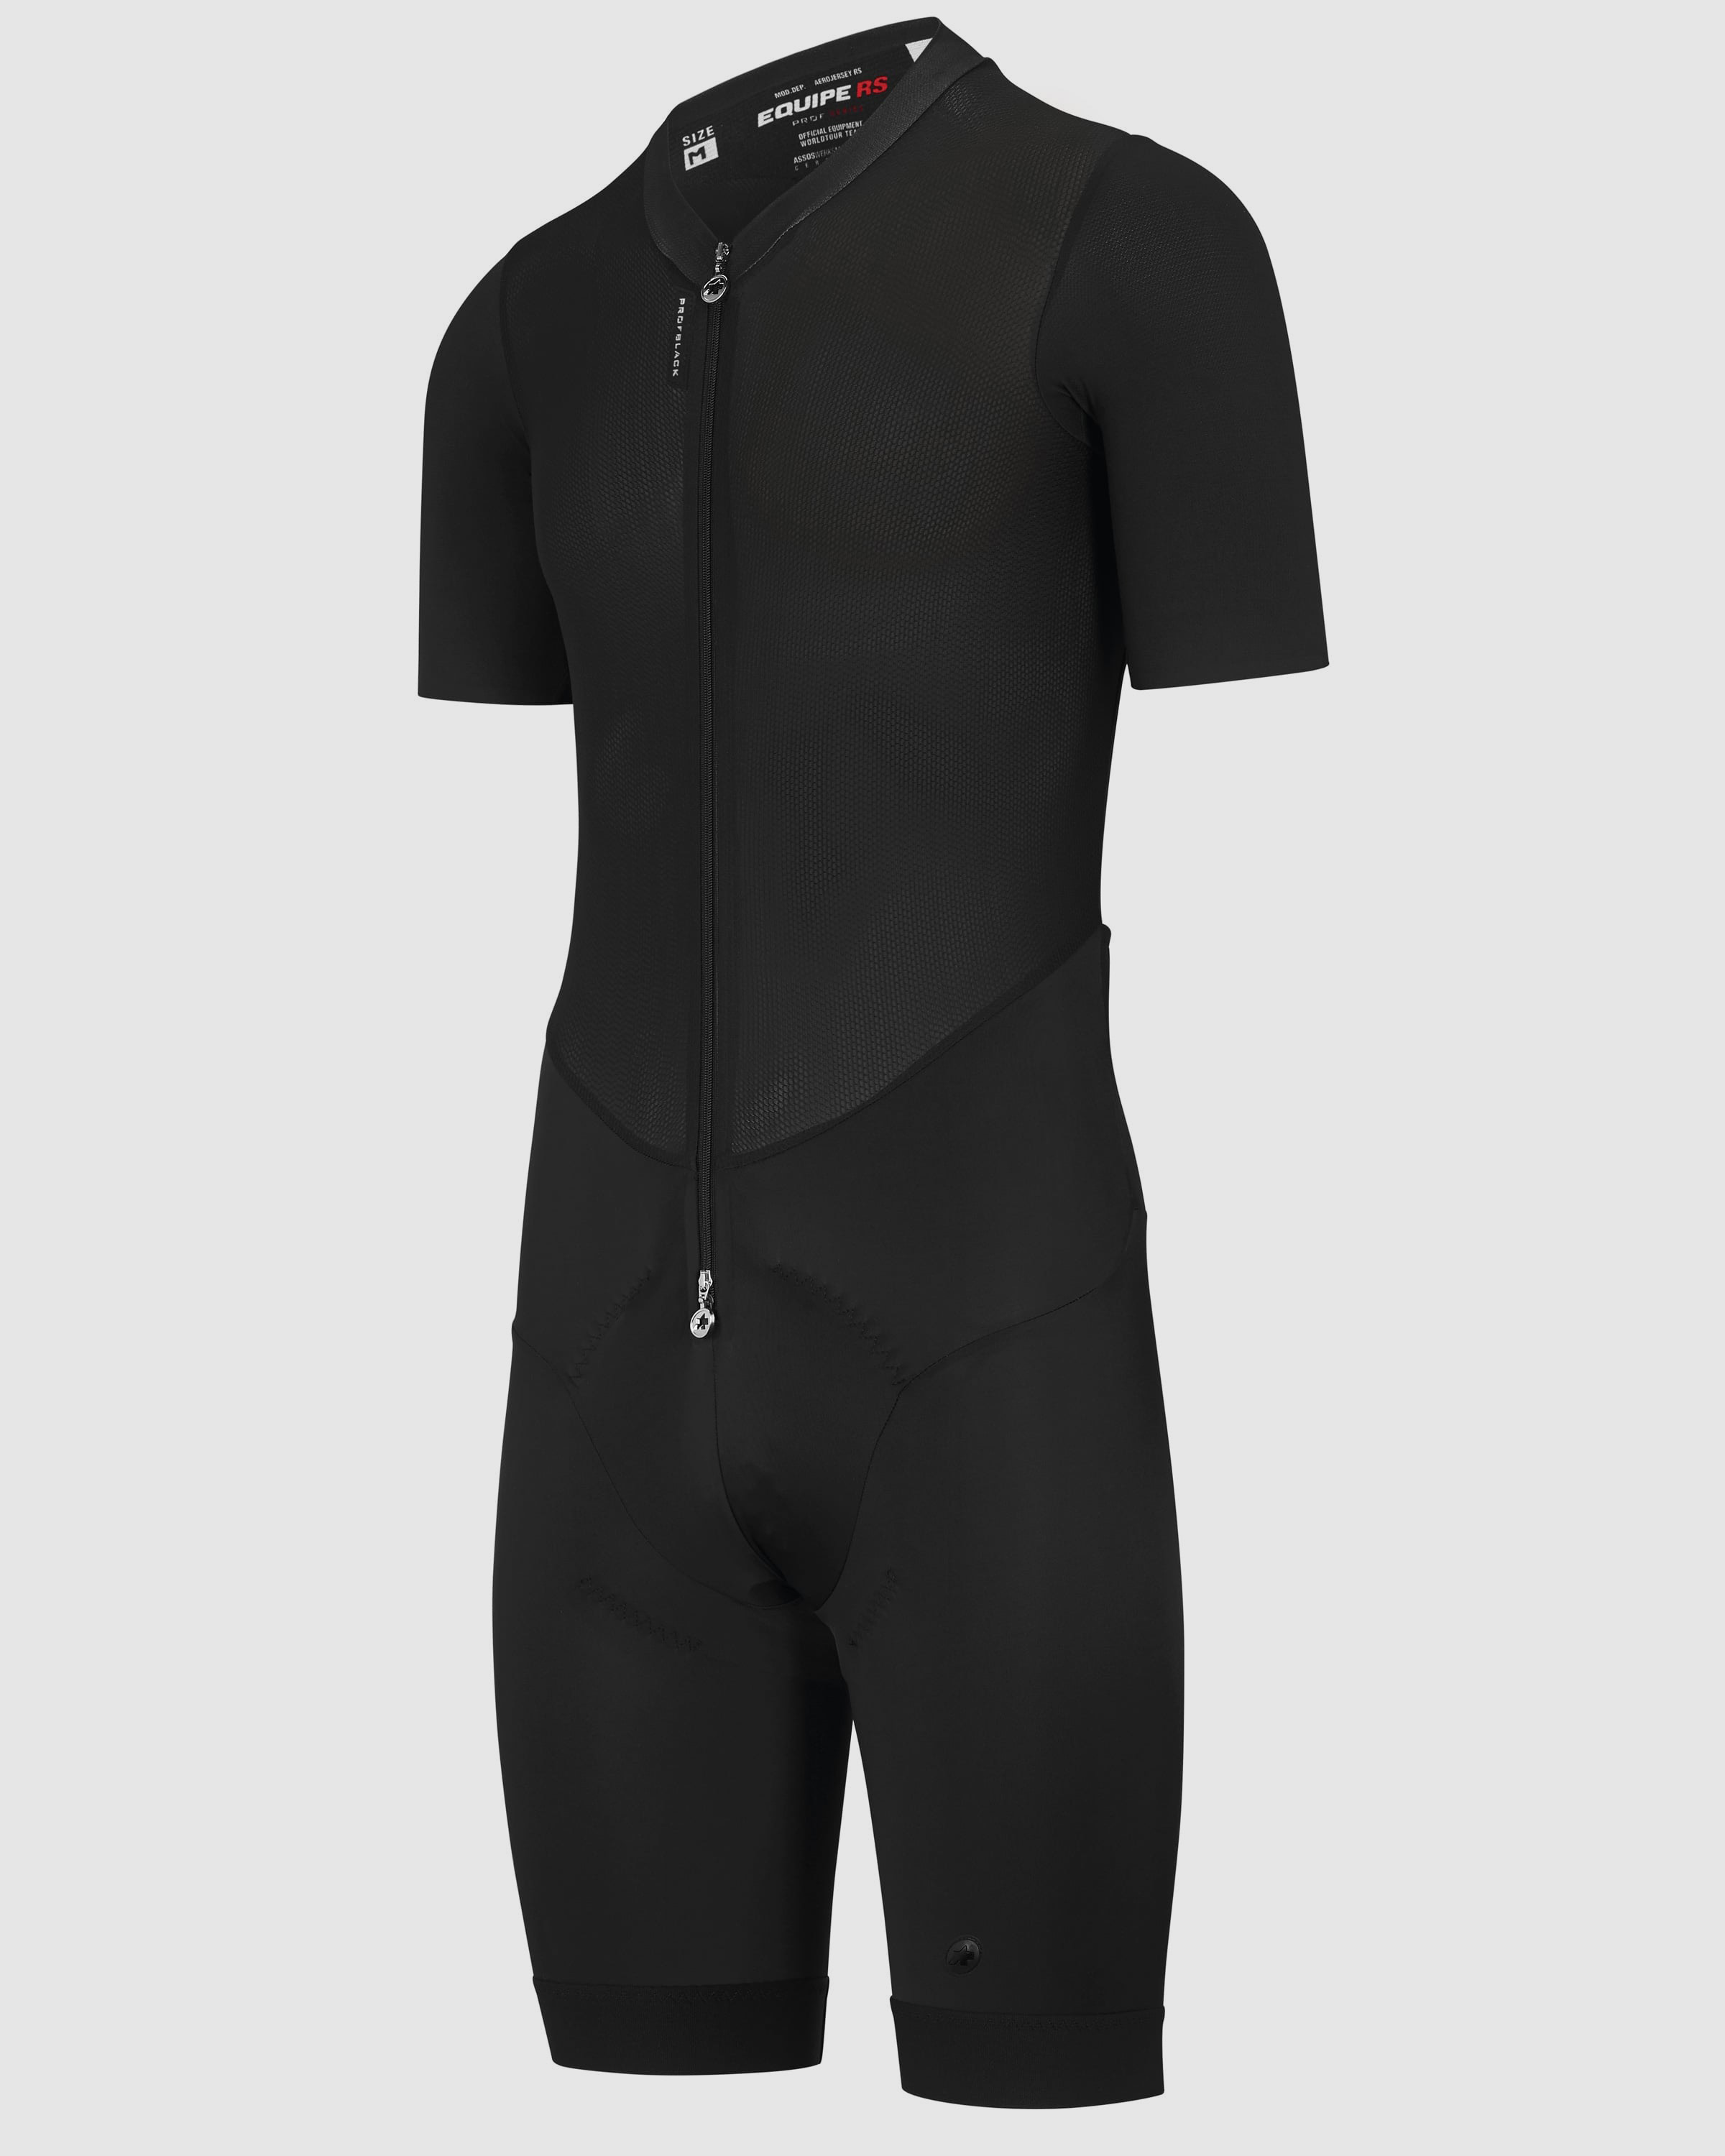 LEHOUDINI RS Aero Roadsuit s9 - ASSOS Of Switzerland - Official Outlet